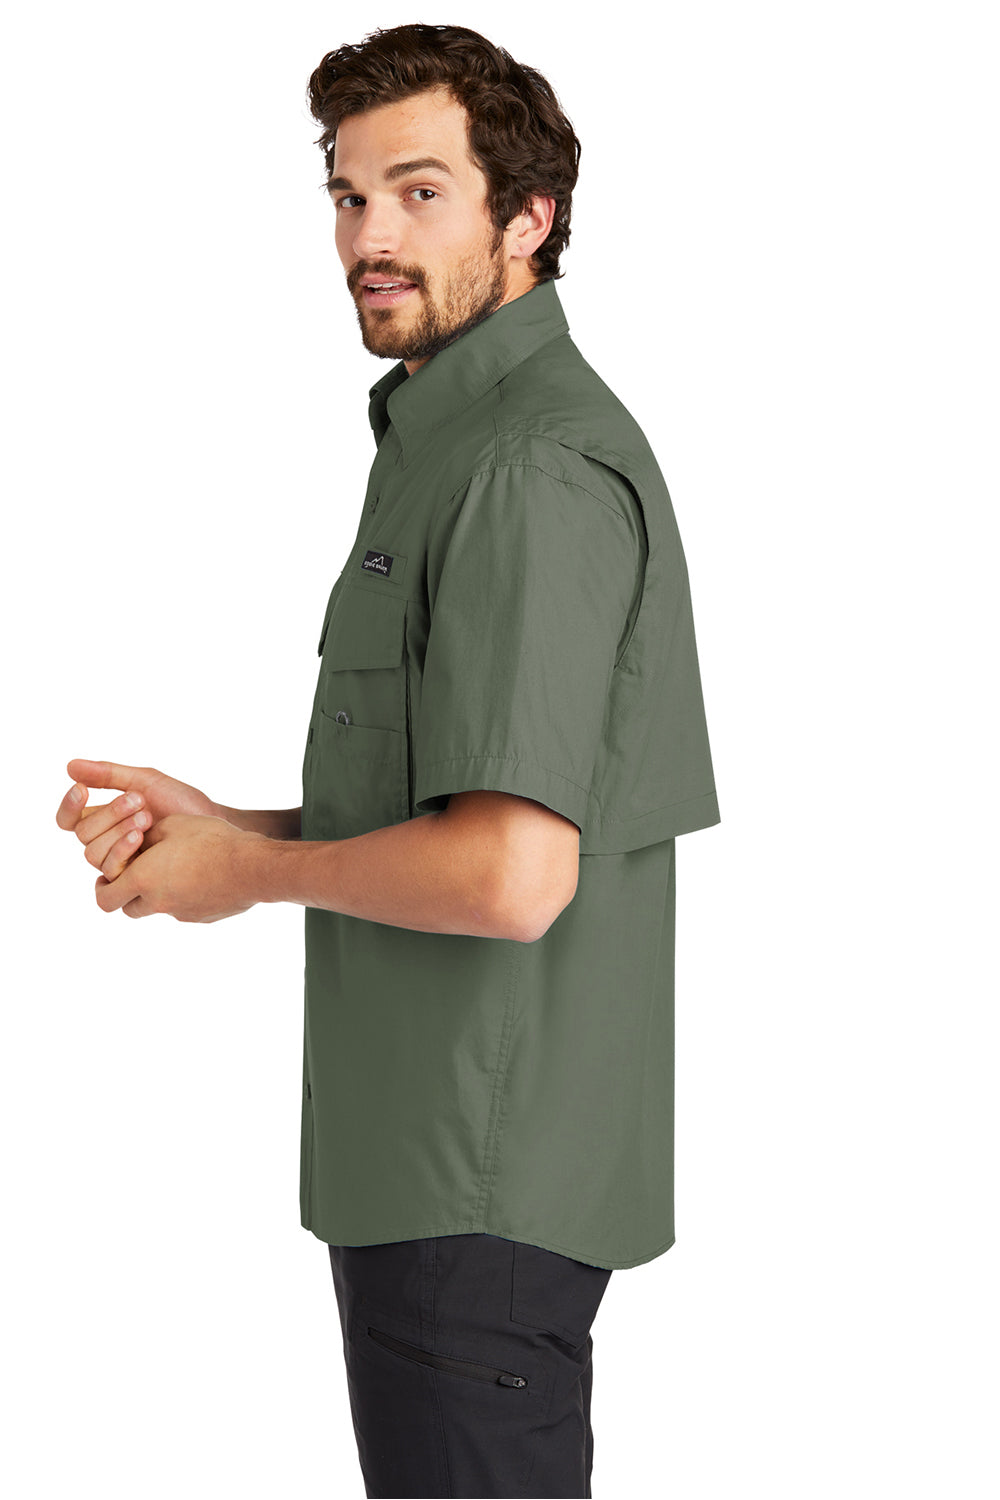 Eddie Bauer EB608 Mens Fishing Short Sleeve Button Down Shirt w/ Double Pockets Seagrass Green Model Side